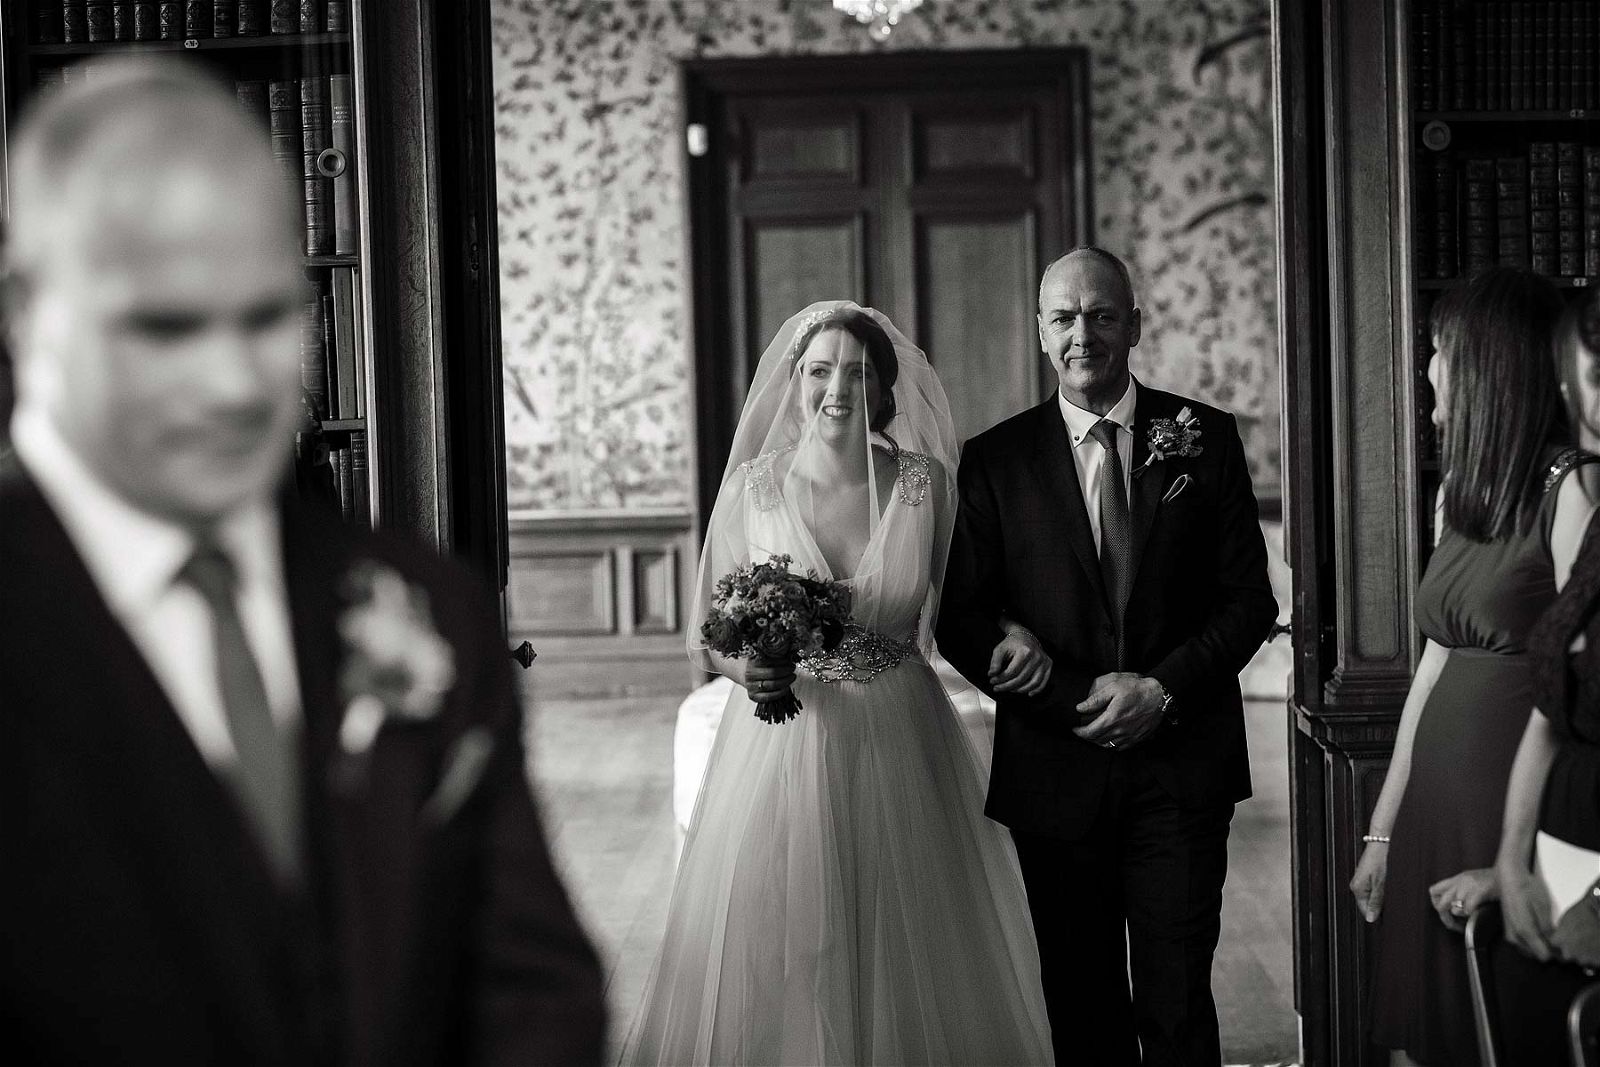 Capturing the procession of the Bride and Bridal party at Sandon Hall in Stafford by Stafford Reportage Wedding Photographer Stuart James